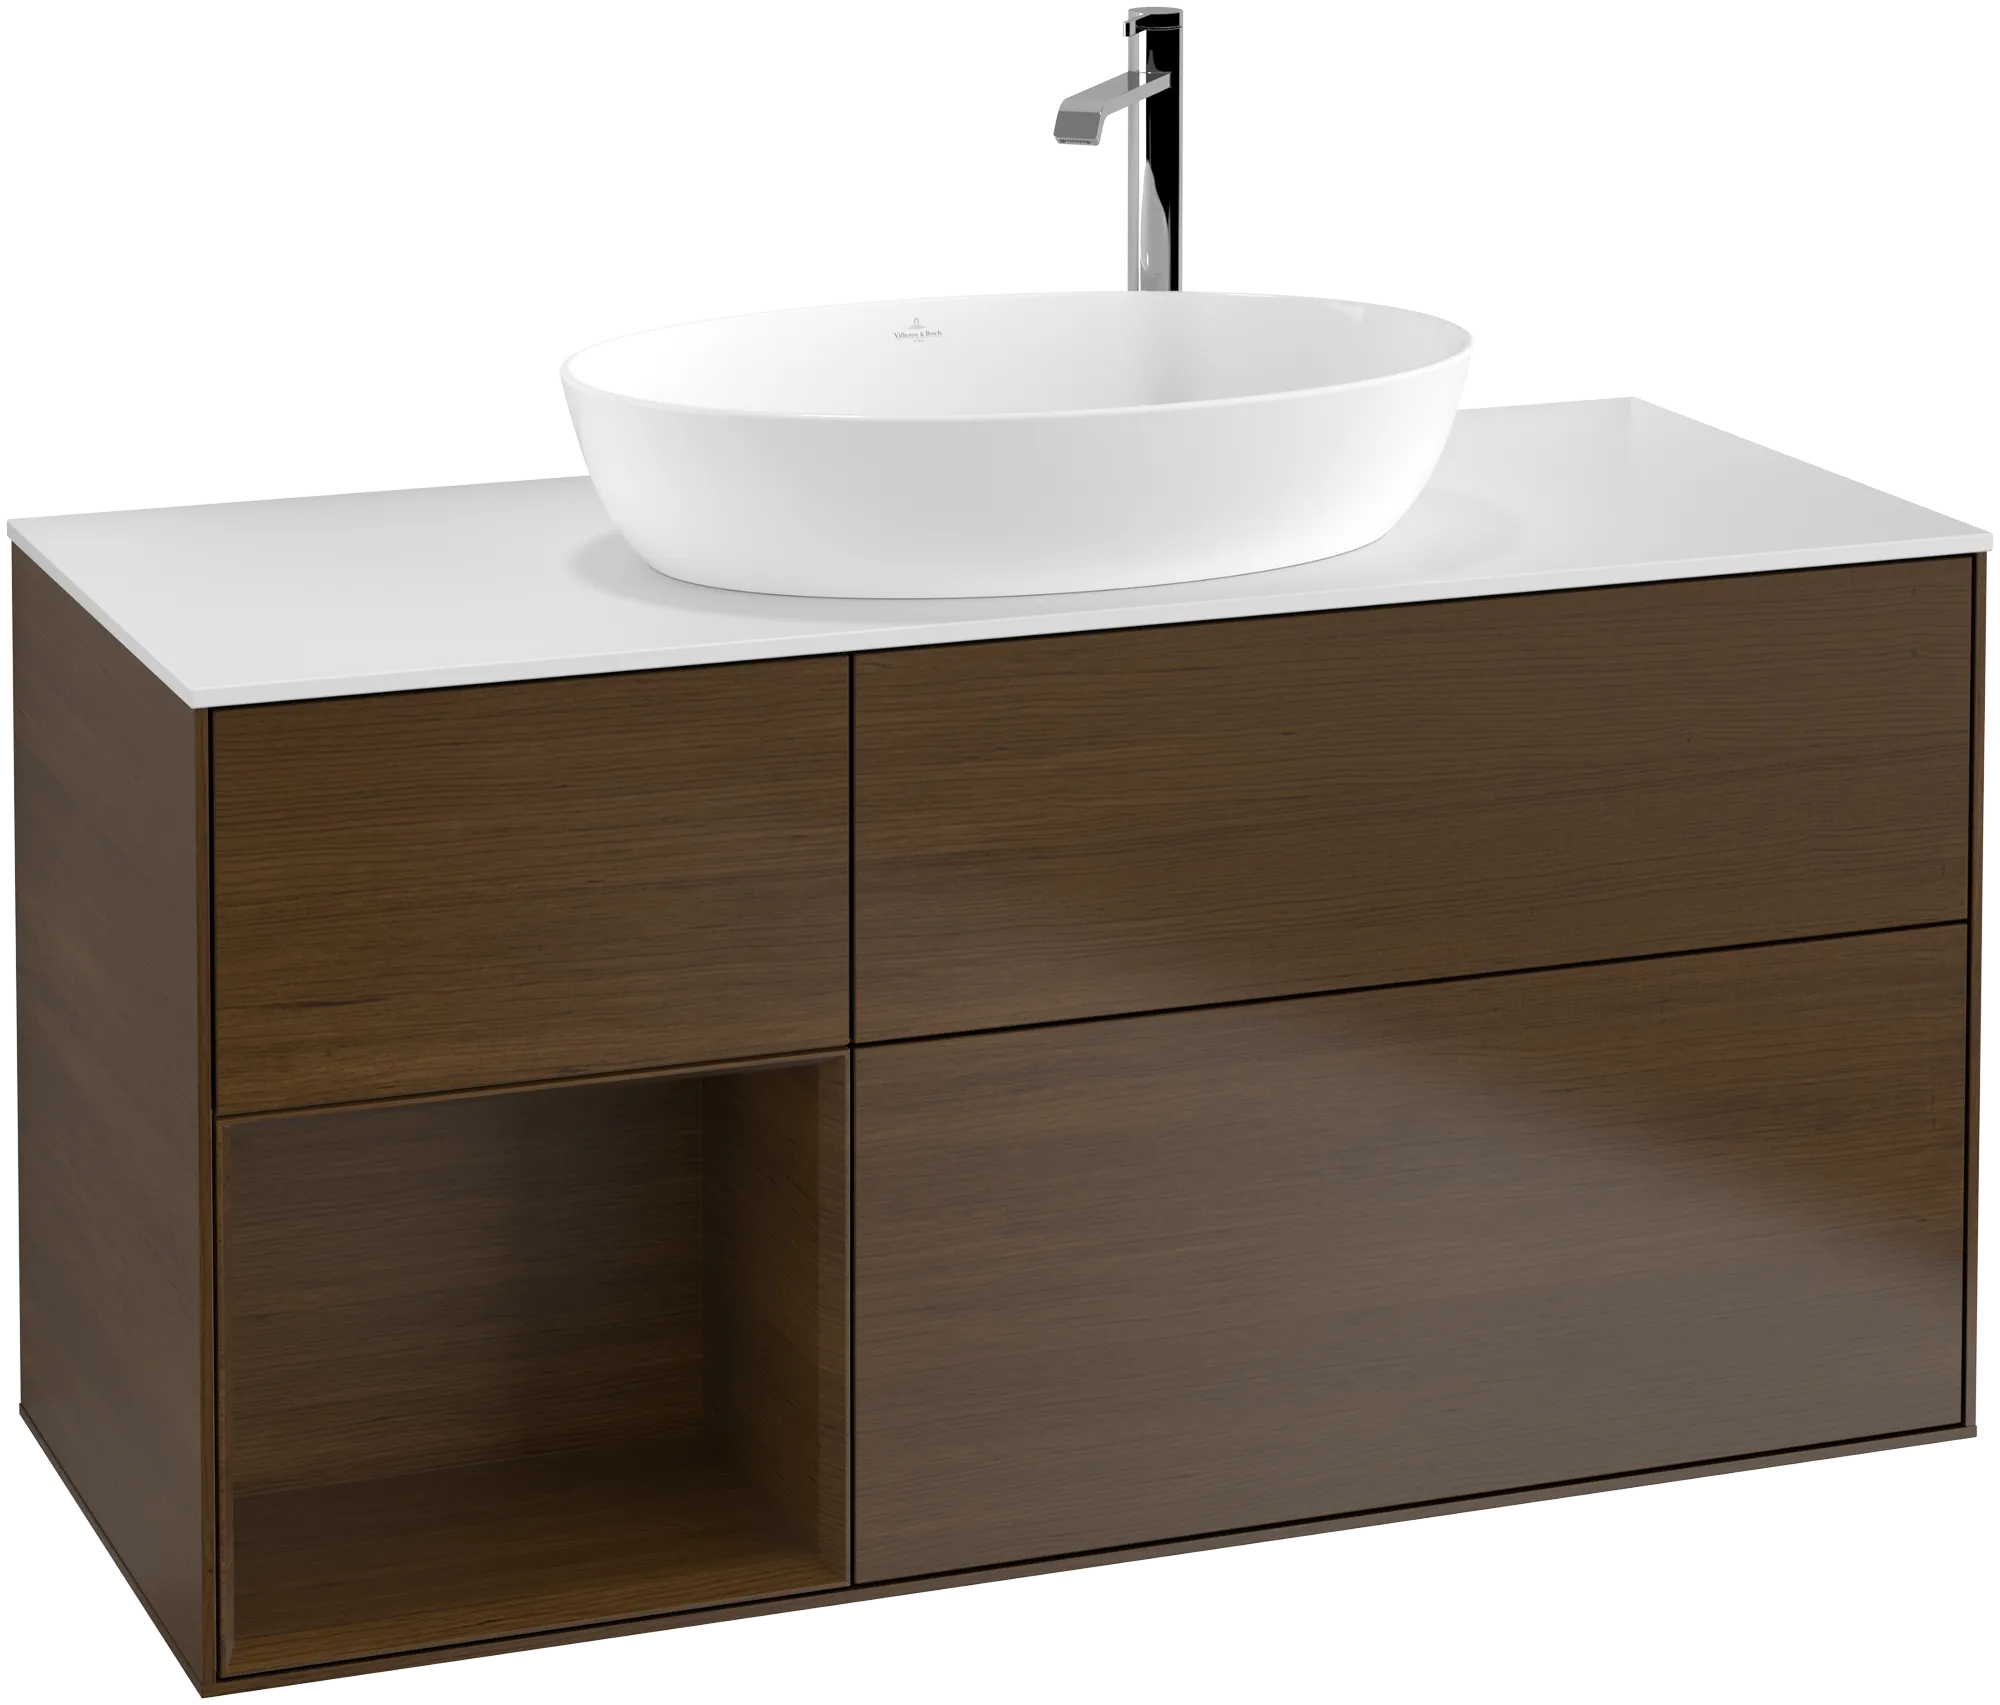 Picture of VILLEROY BOCH Finion Vanity unit, with lighting, 3 pull-out compartments, 1200 x 603 x 501 mm, Walnut Veneer / Walnut Veneer / Glass White Matt #G941GNGN